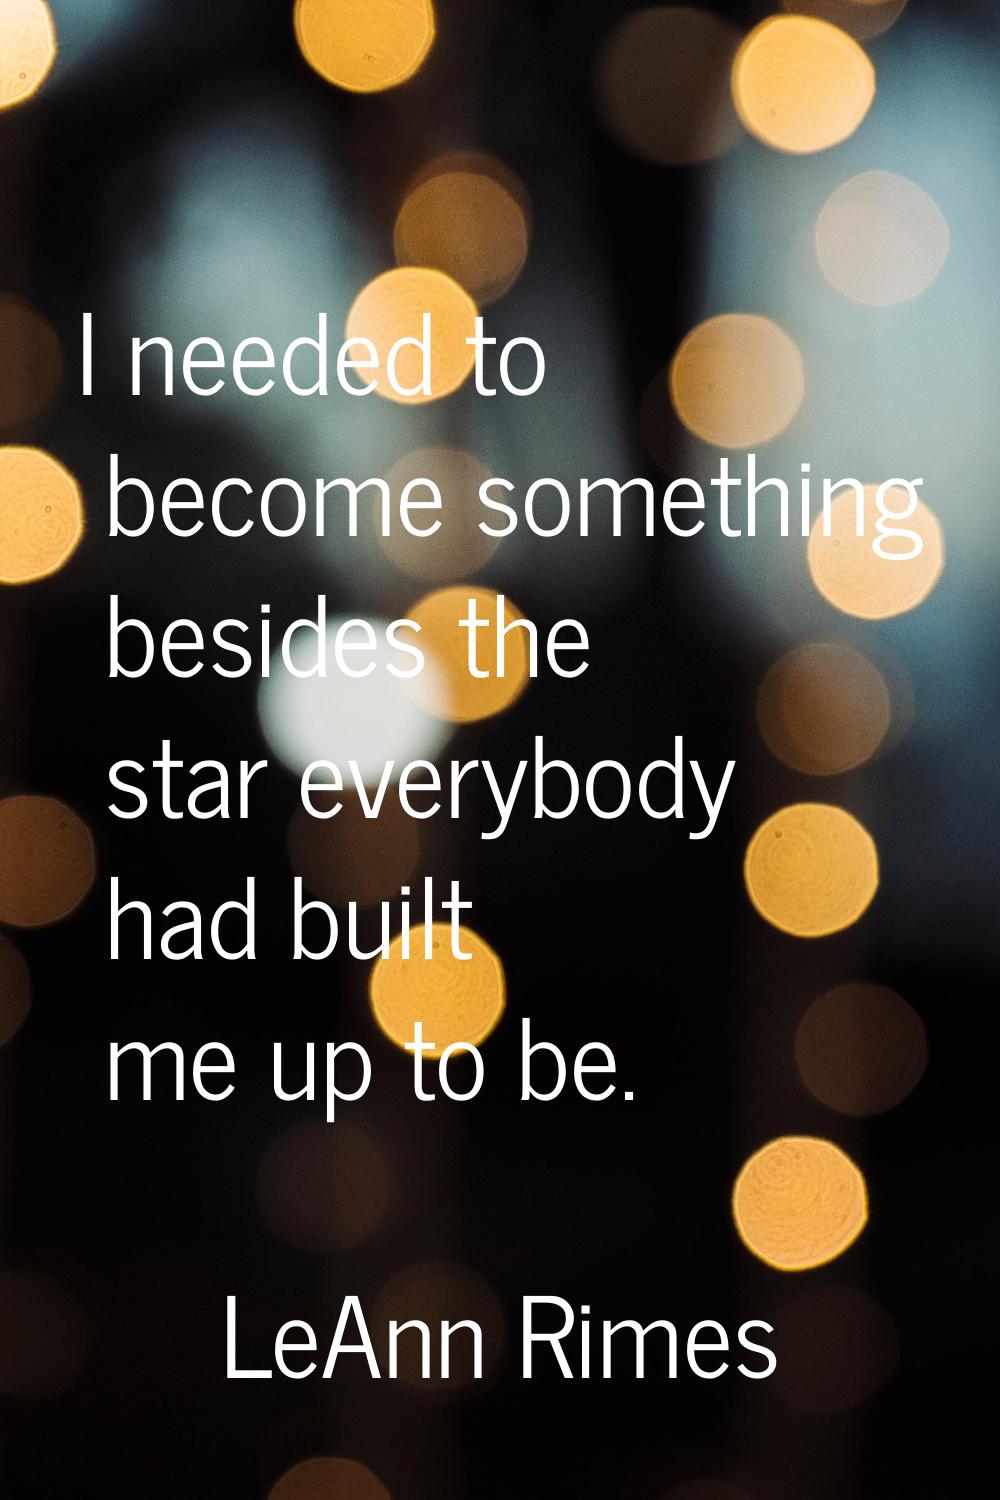 I needed to become something besides the star everybody had built me up to be.